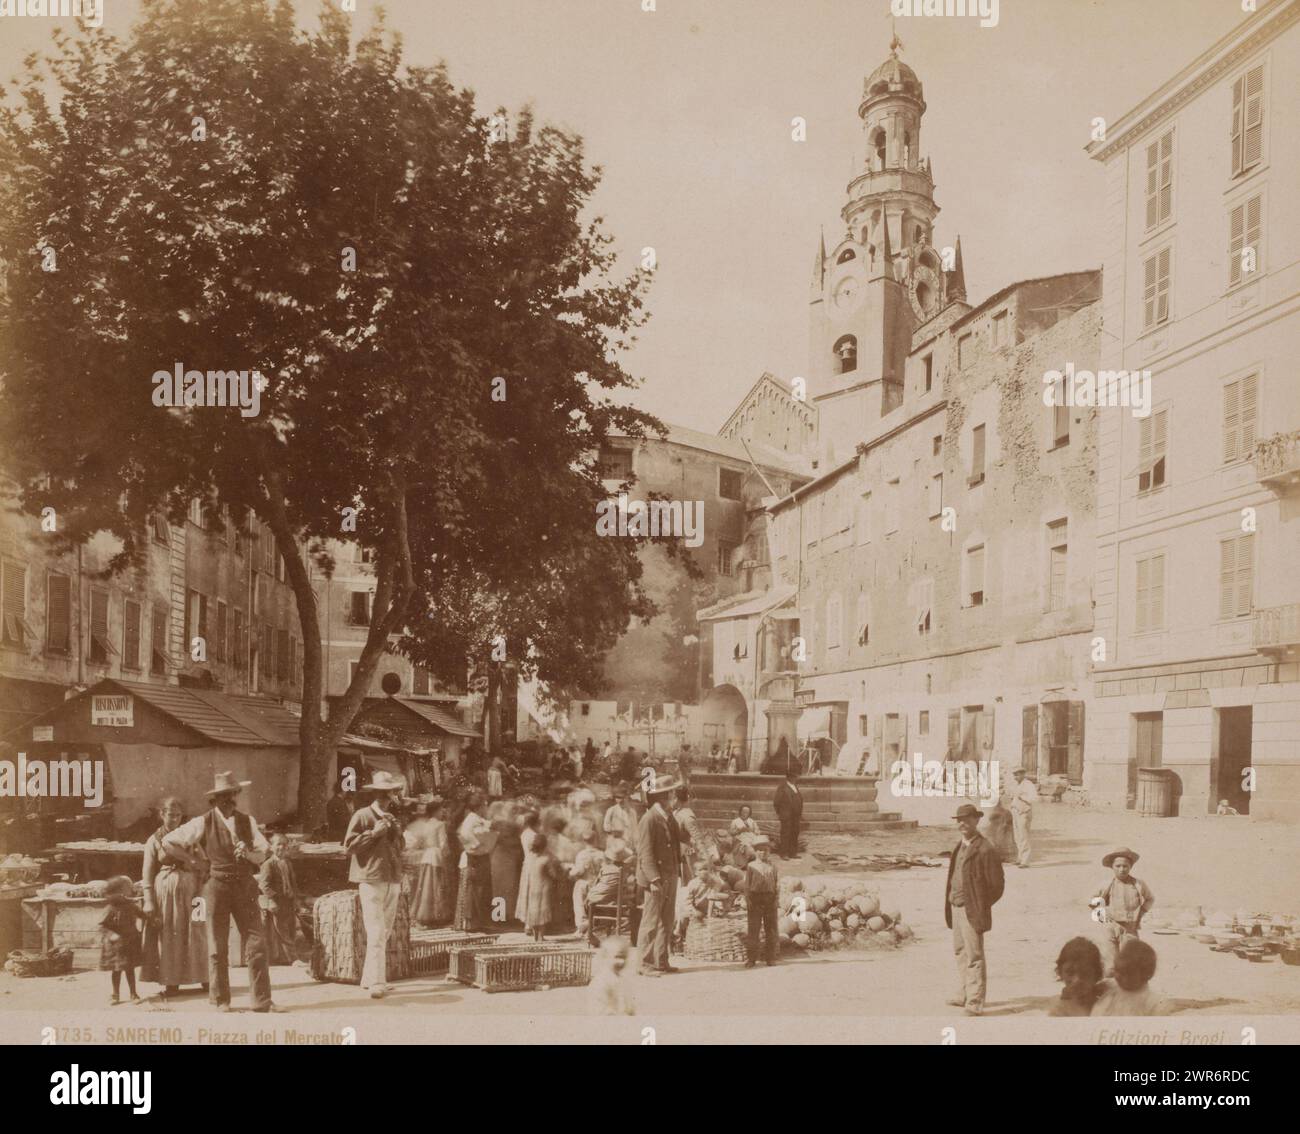 Market Square in San Remo, Piazza del Mercato (title on object), Sanremo (series title on object), Giacomo Brogi, publisher: Giacomo Brogi, San Remo, publisher: Florence, 1864 - 1881, paper, albumen print, height 204 mm × width 257 mm, height 258 mm × width 358 mm, photograph Stock Photo